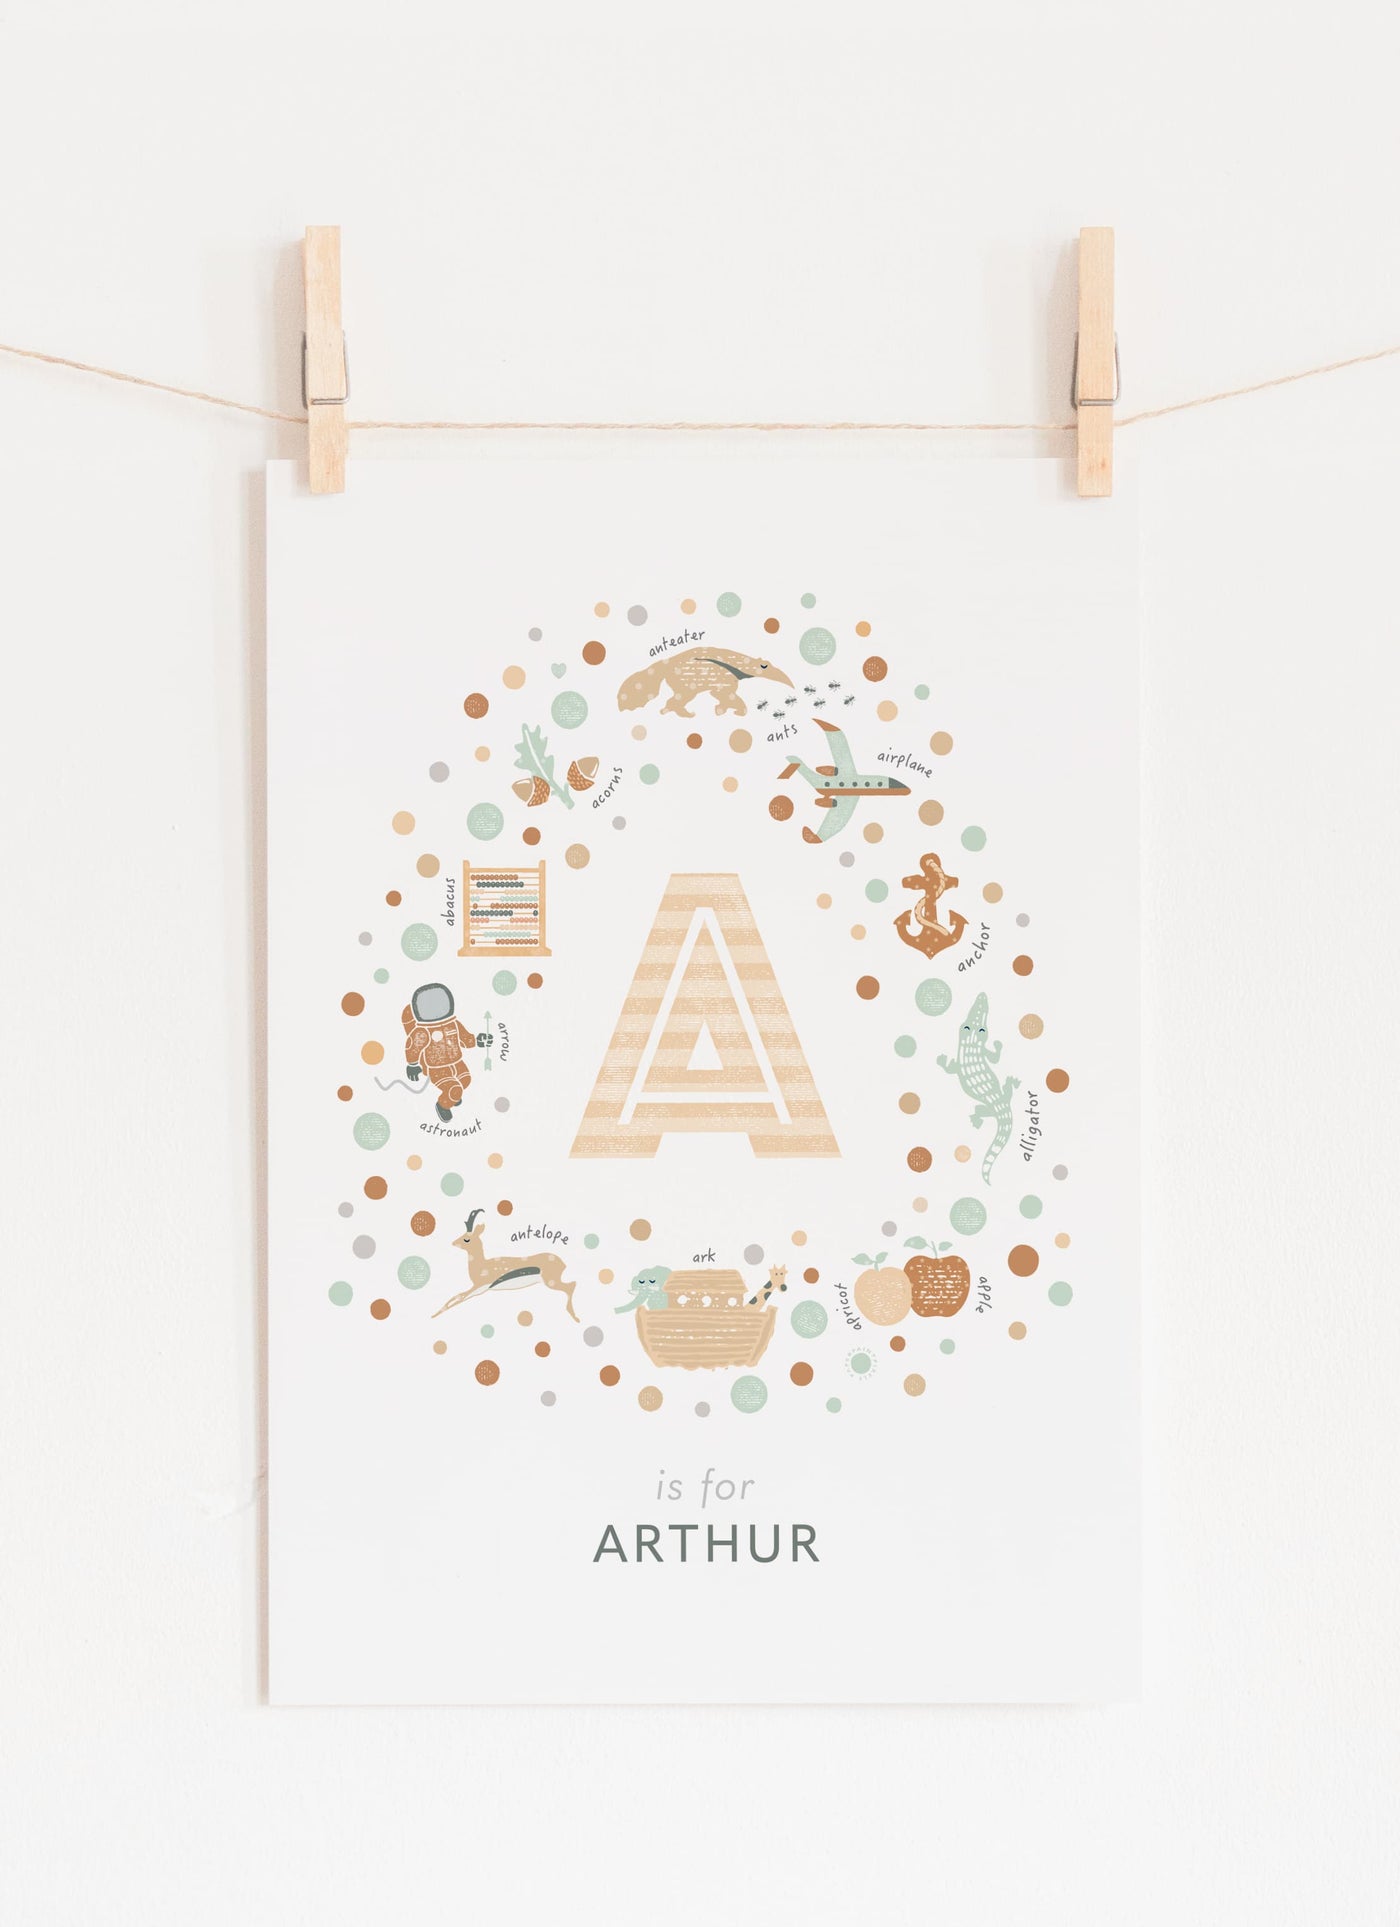 Personalised Children's Initial Letter A Name Art Print